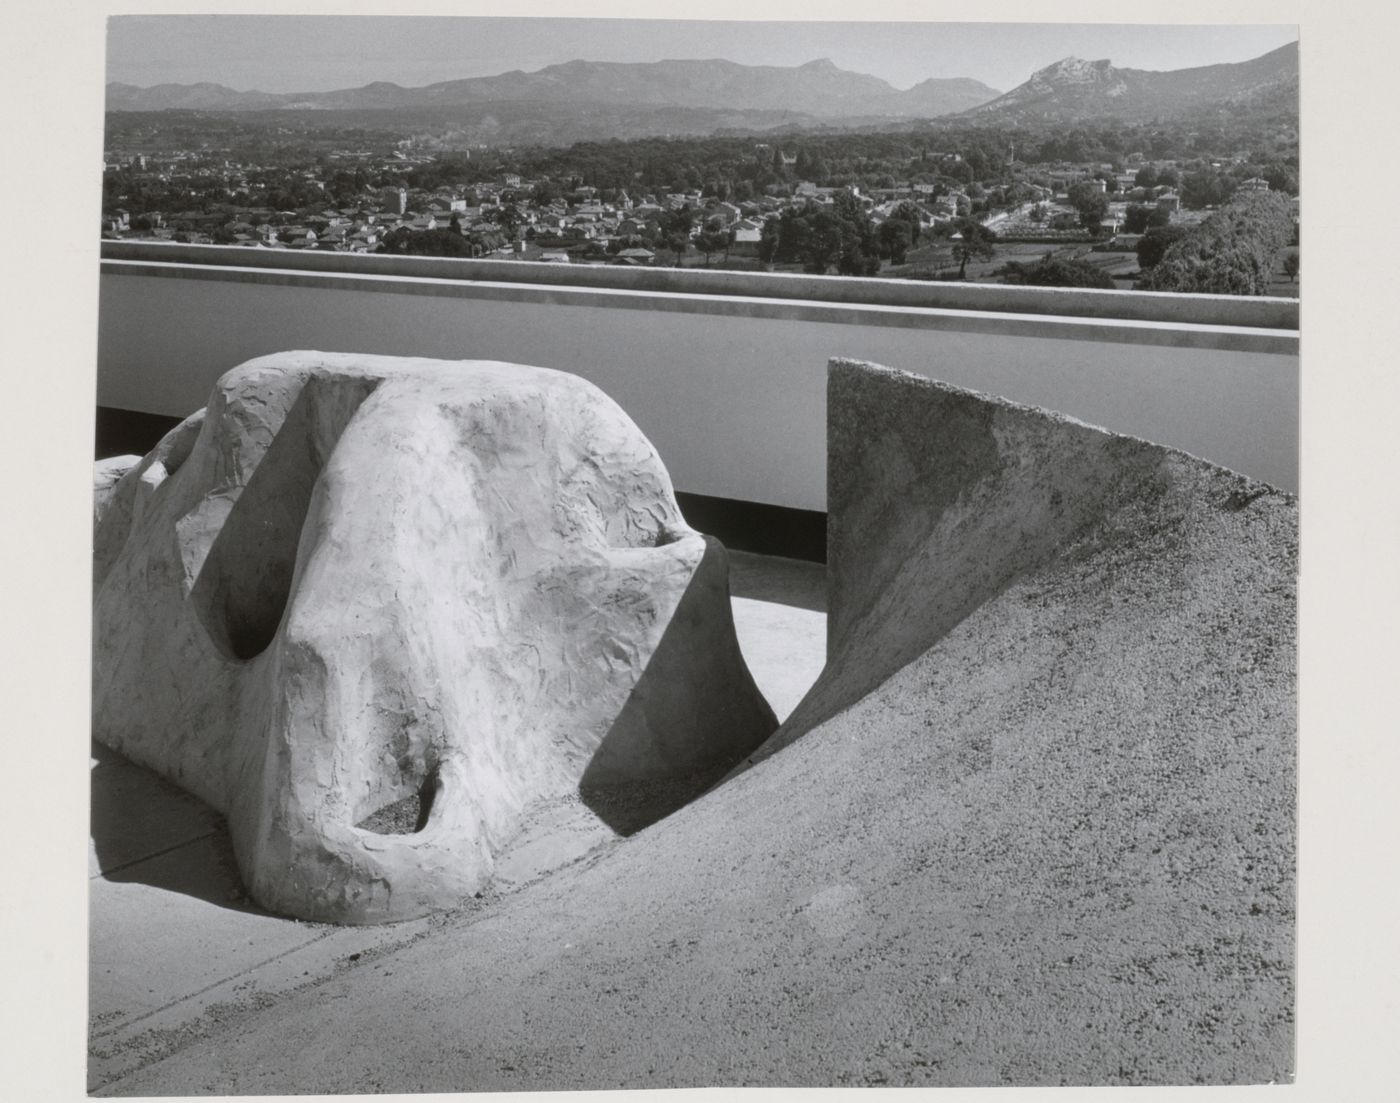 View of the roof of Unité d'habitation showing the playground and mountains in the distance, Marseille, France